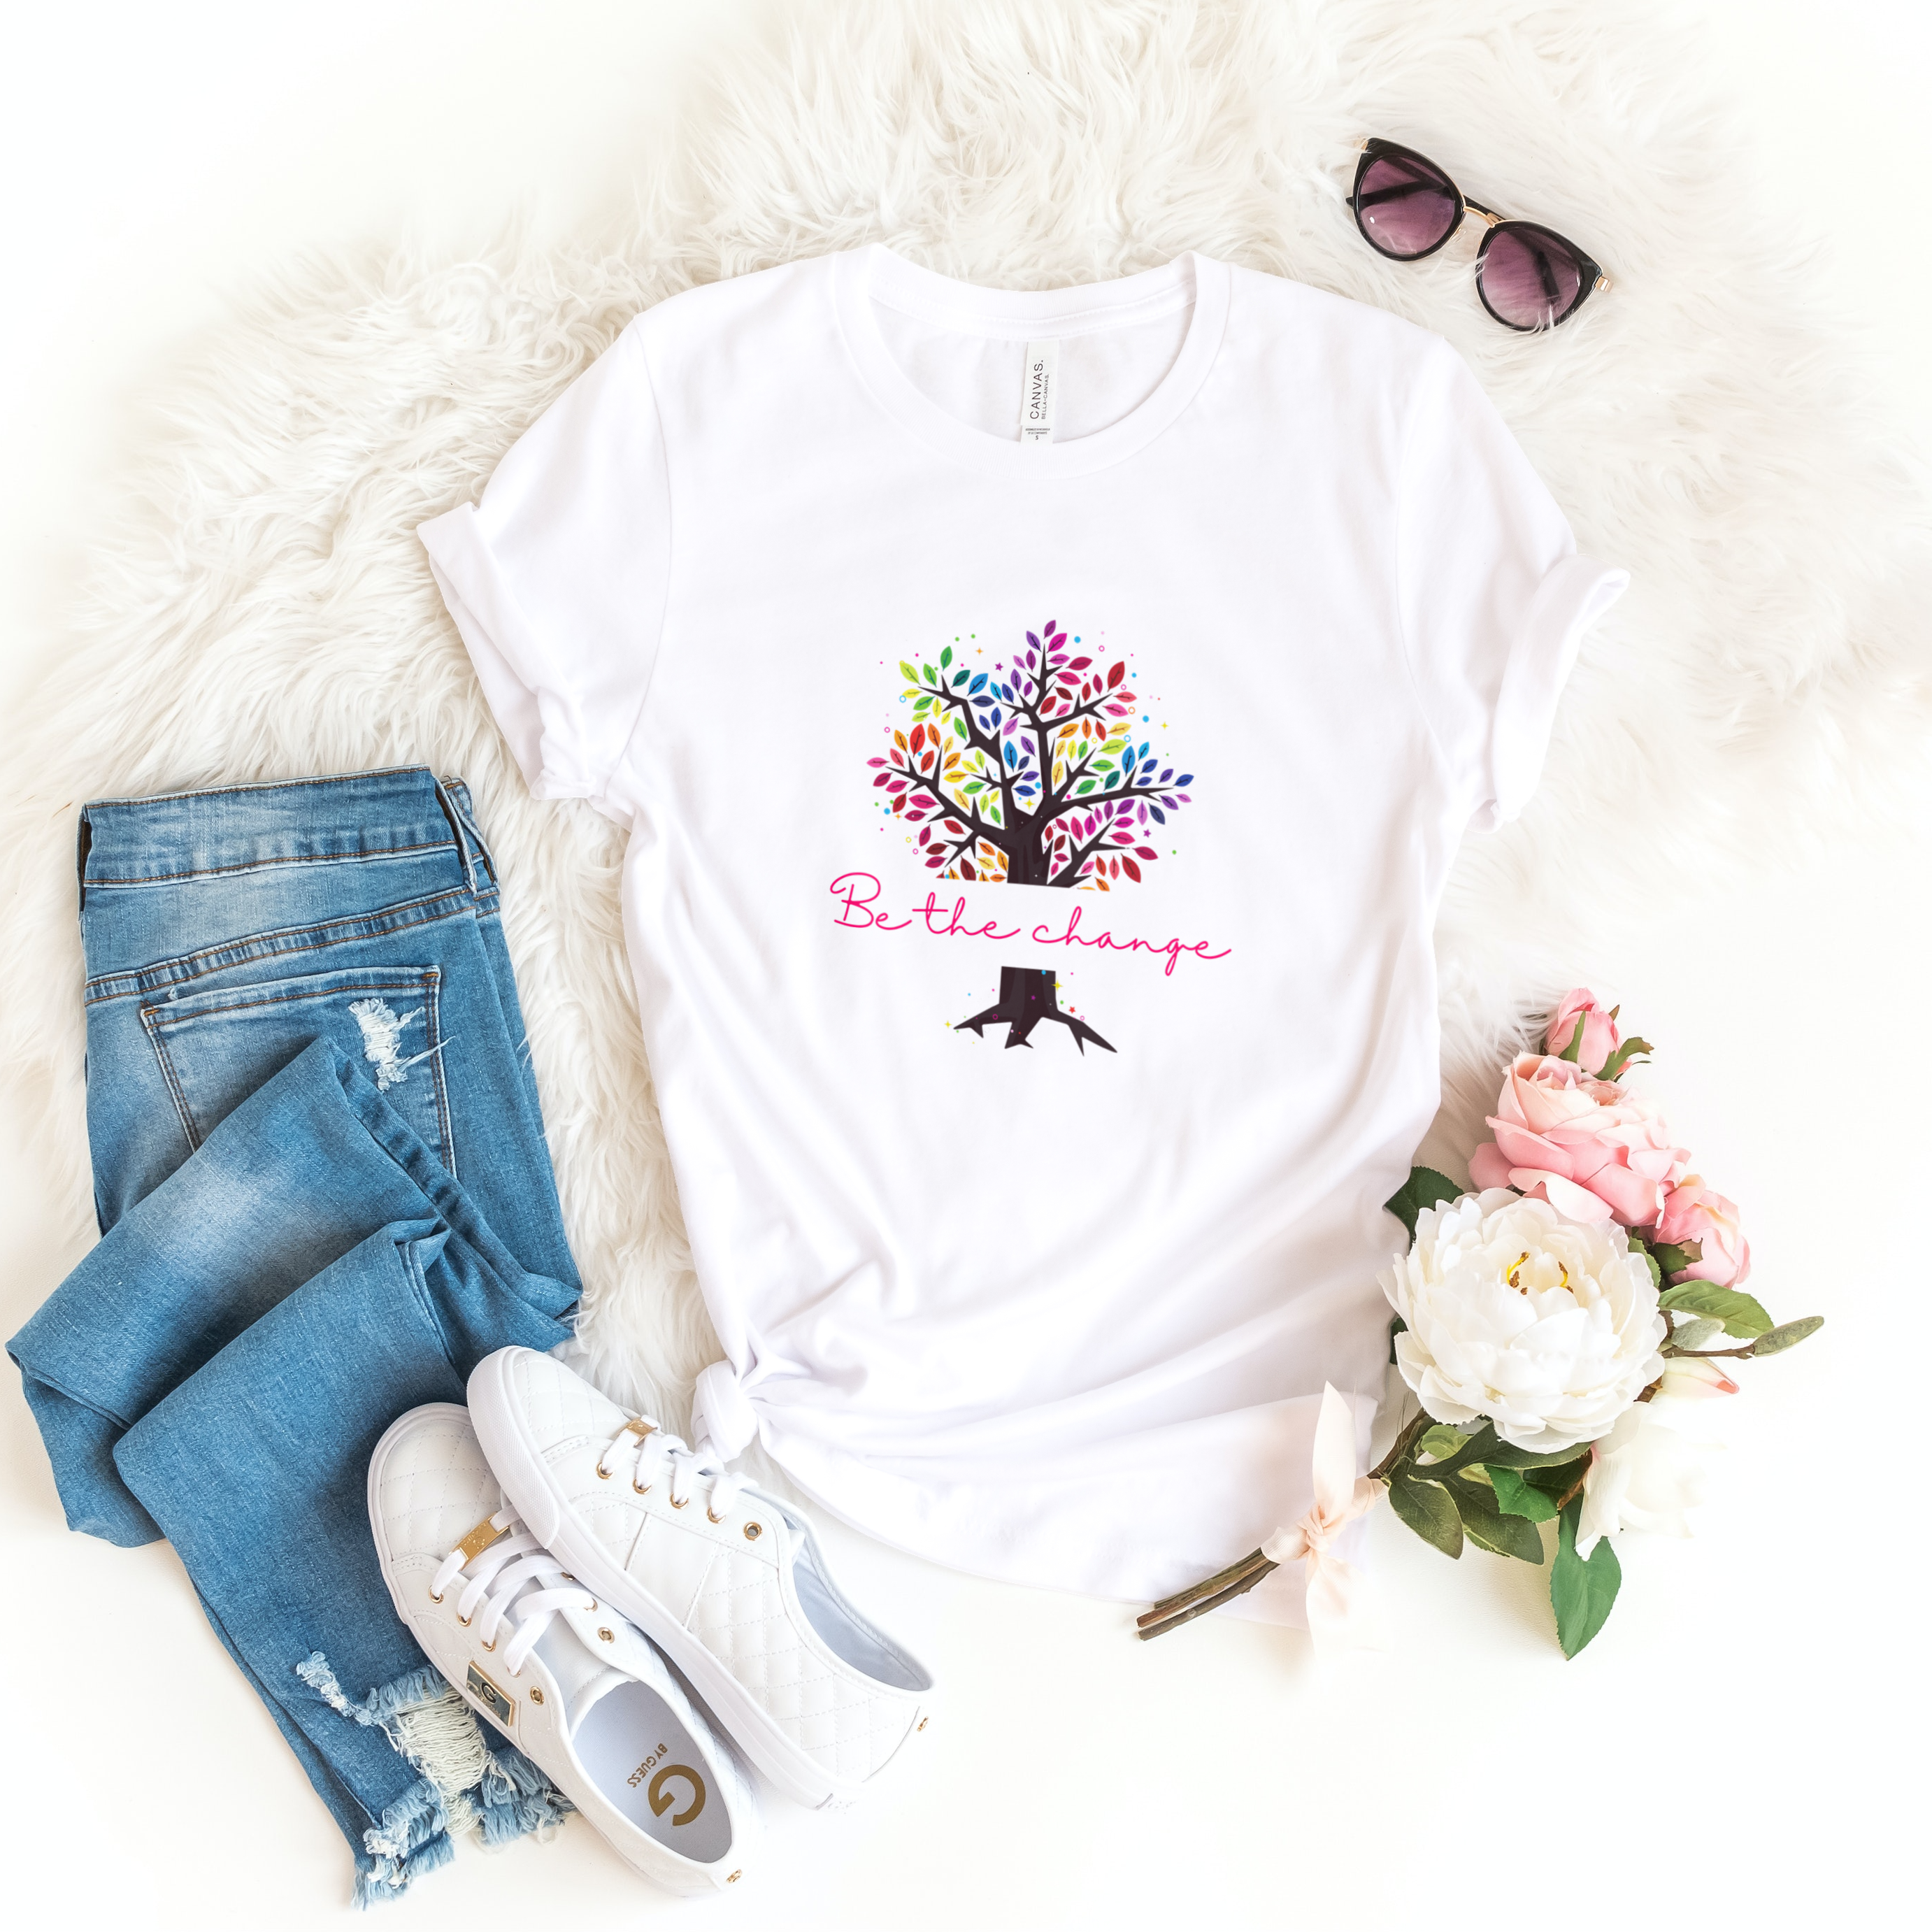 Story of Awakening Lifestyle Community Spirituality Relationships Love Light Meditation Oneness Earth Balance Healing Shop Store Charity Tree Nature Read Write T shirt Tops Tees Clothing Women Horoscope Be The Change Quote Colorful Tree Environment